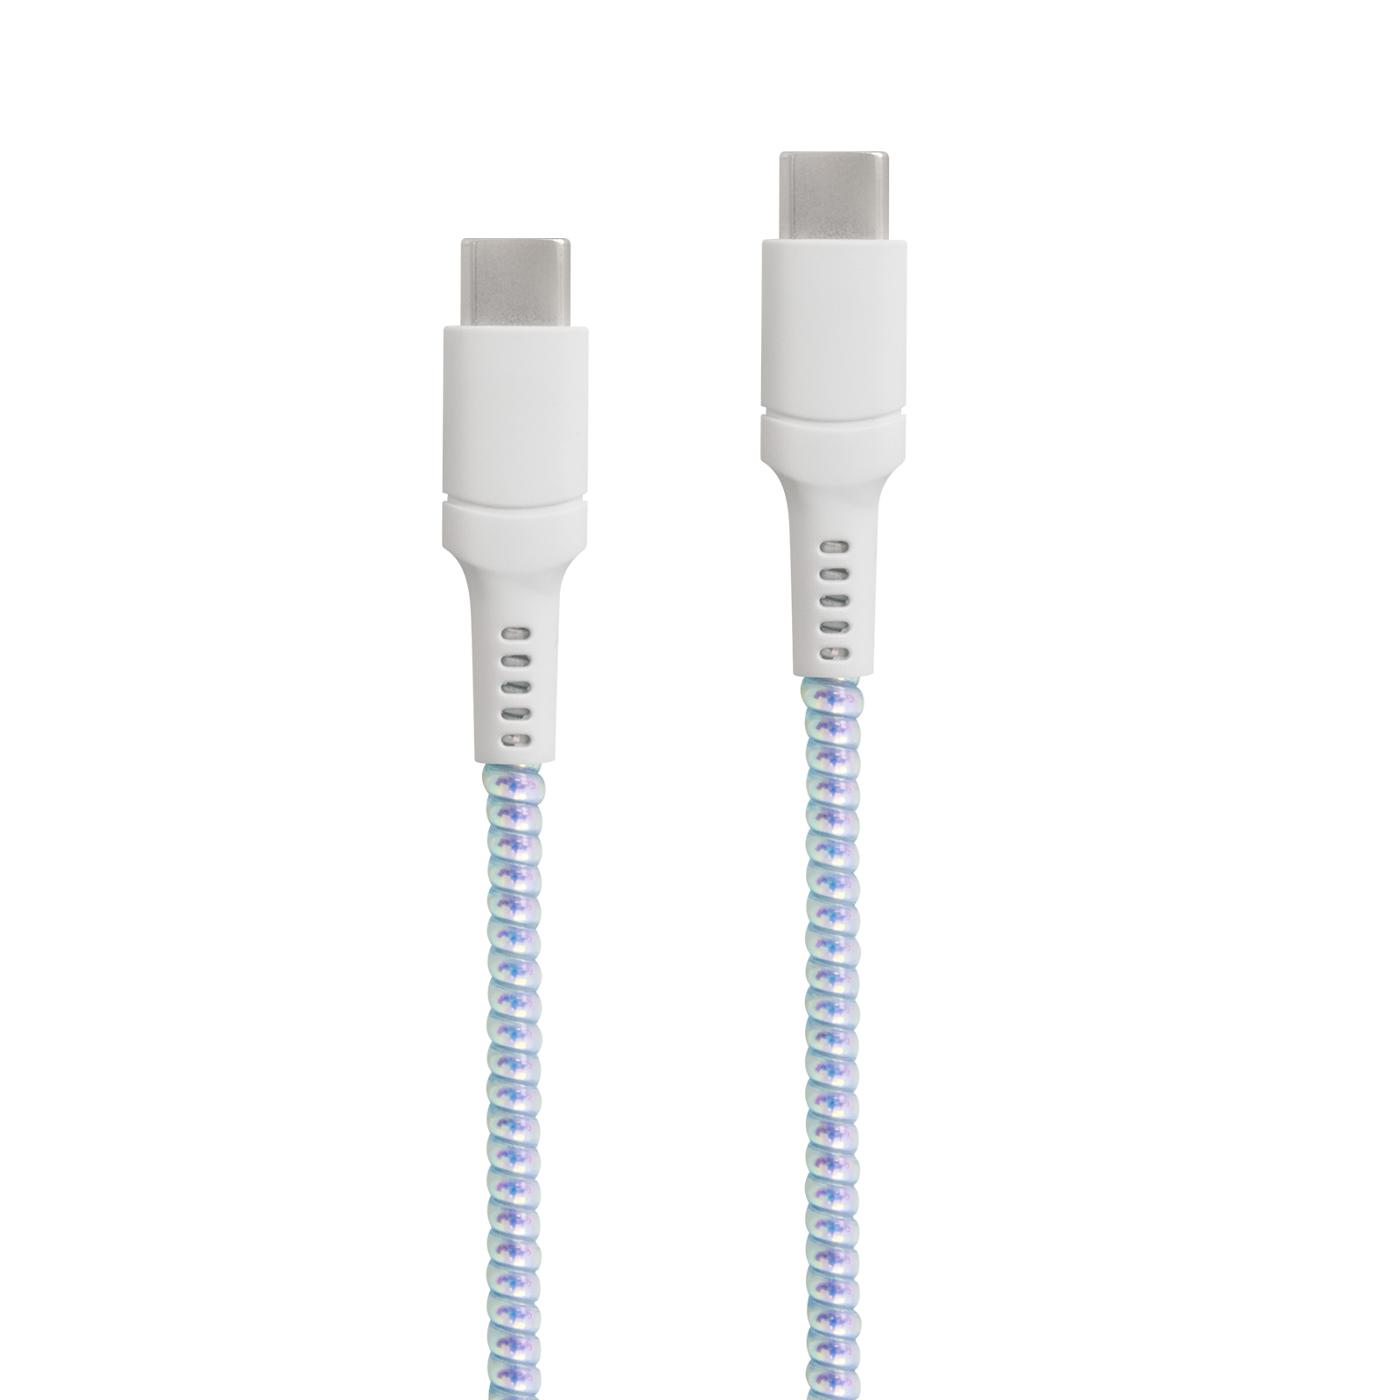 Helix PrismCharge USB-C Iridescent Charge Cable - White; image 2 of 2